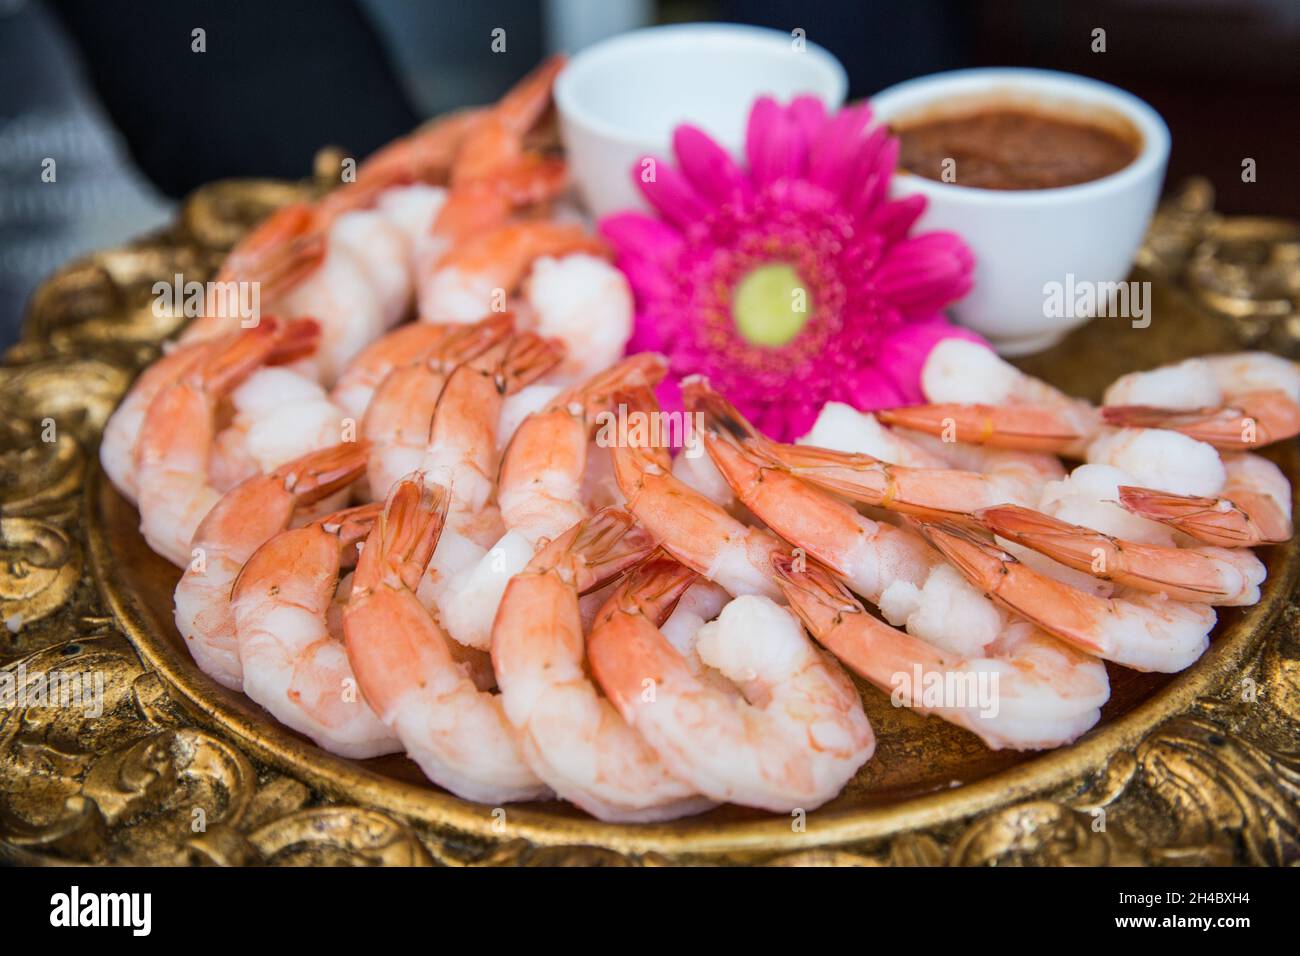 A golden plate with fresh prawns is on display at an event. Stock Photo